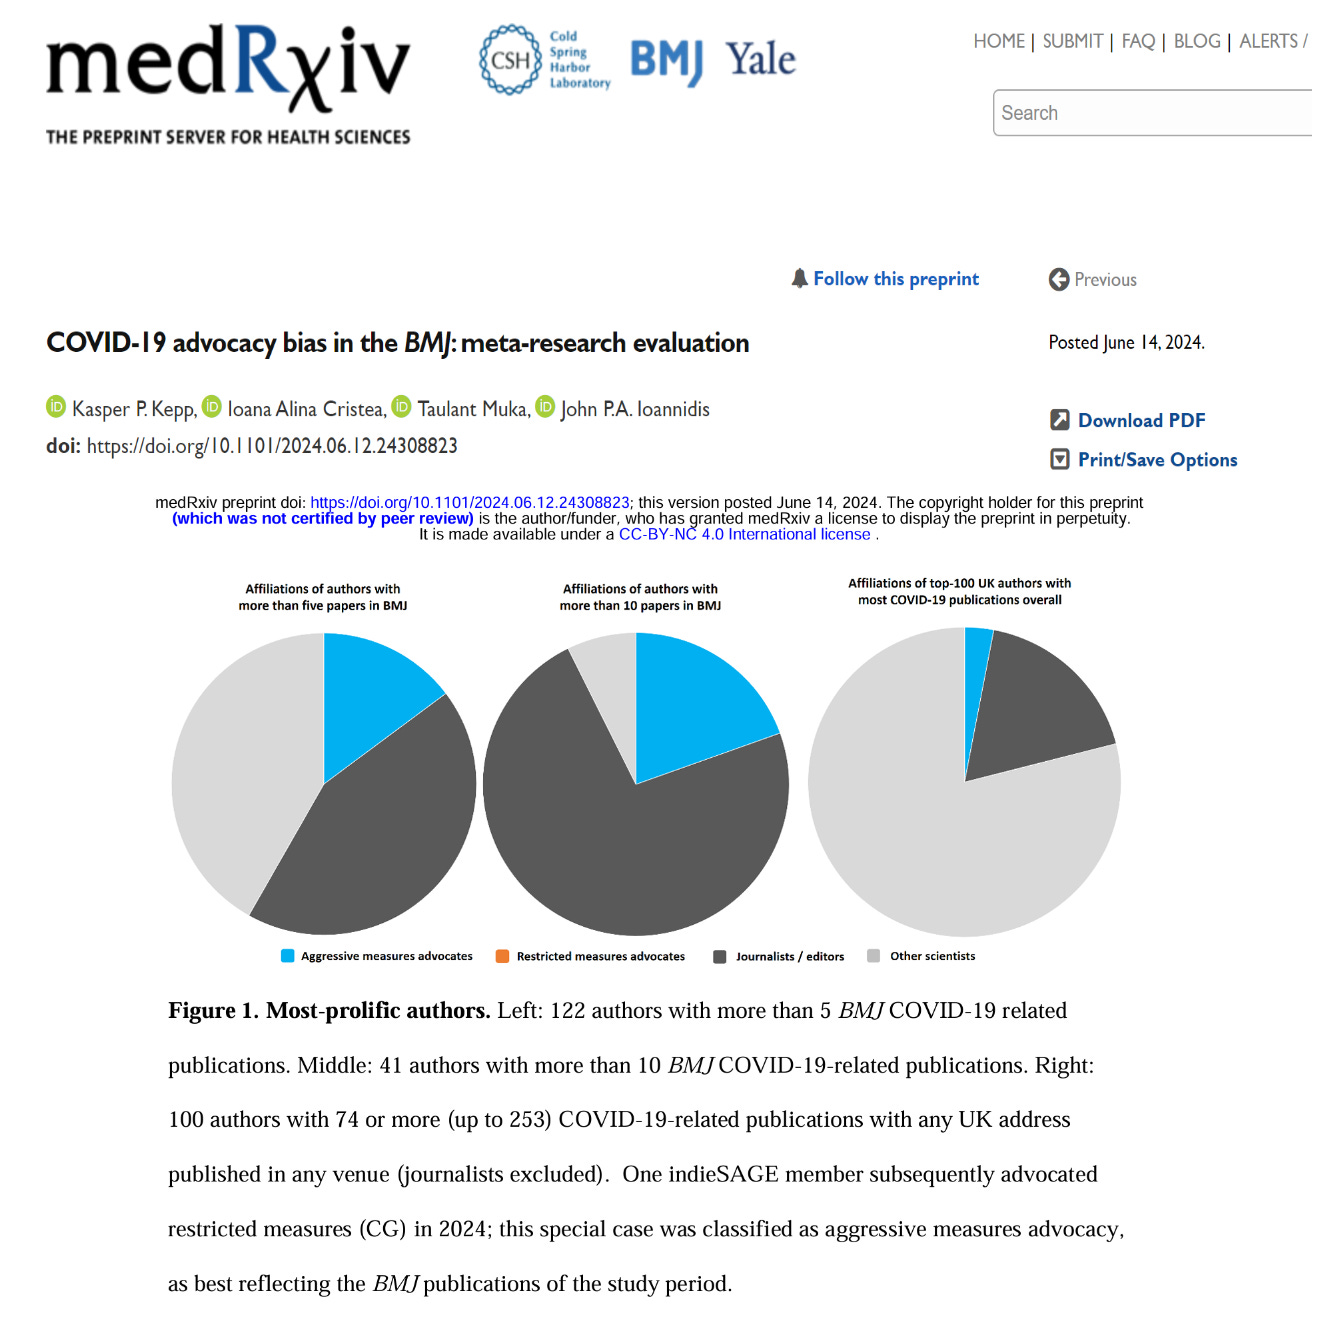 COVID-19 “Aggressive Measures” Advocacy Bias in the BMJ Misled the World and Caused Harm